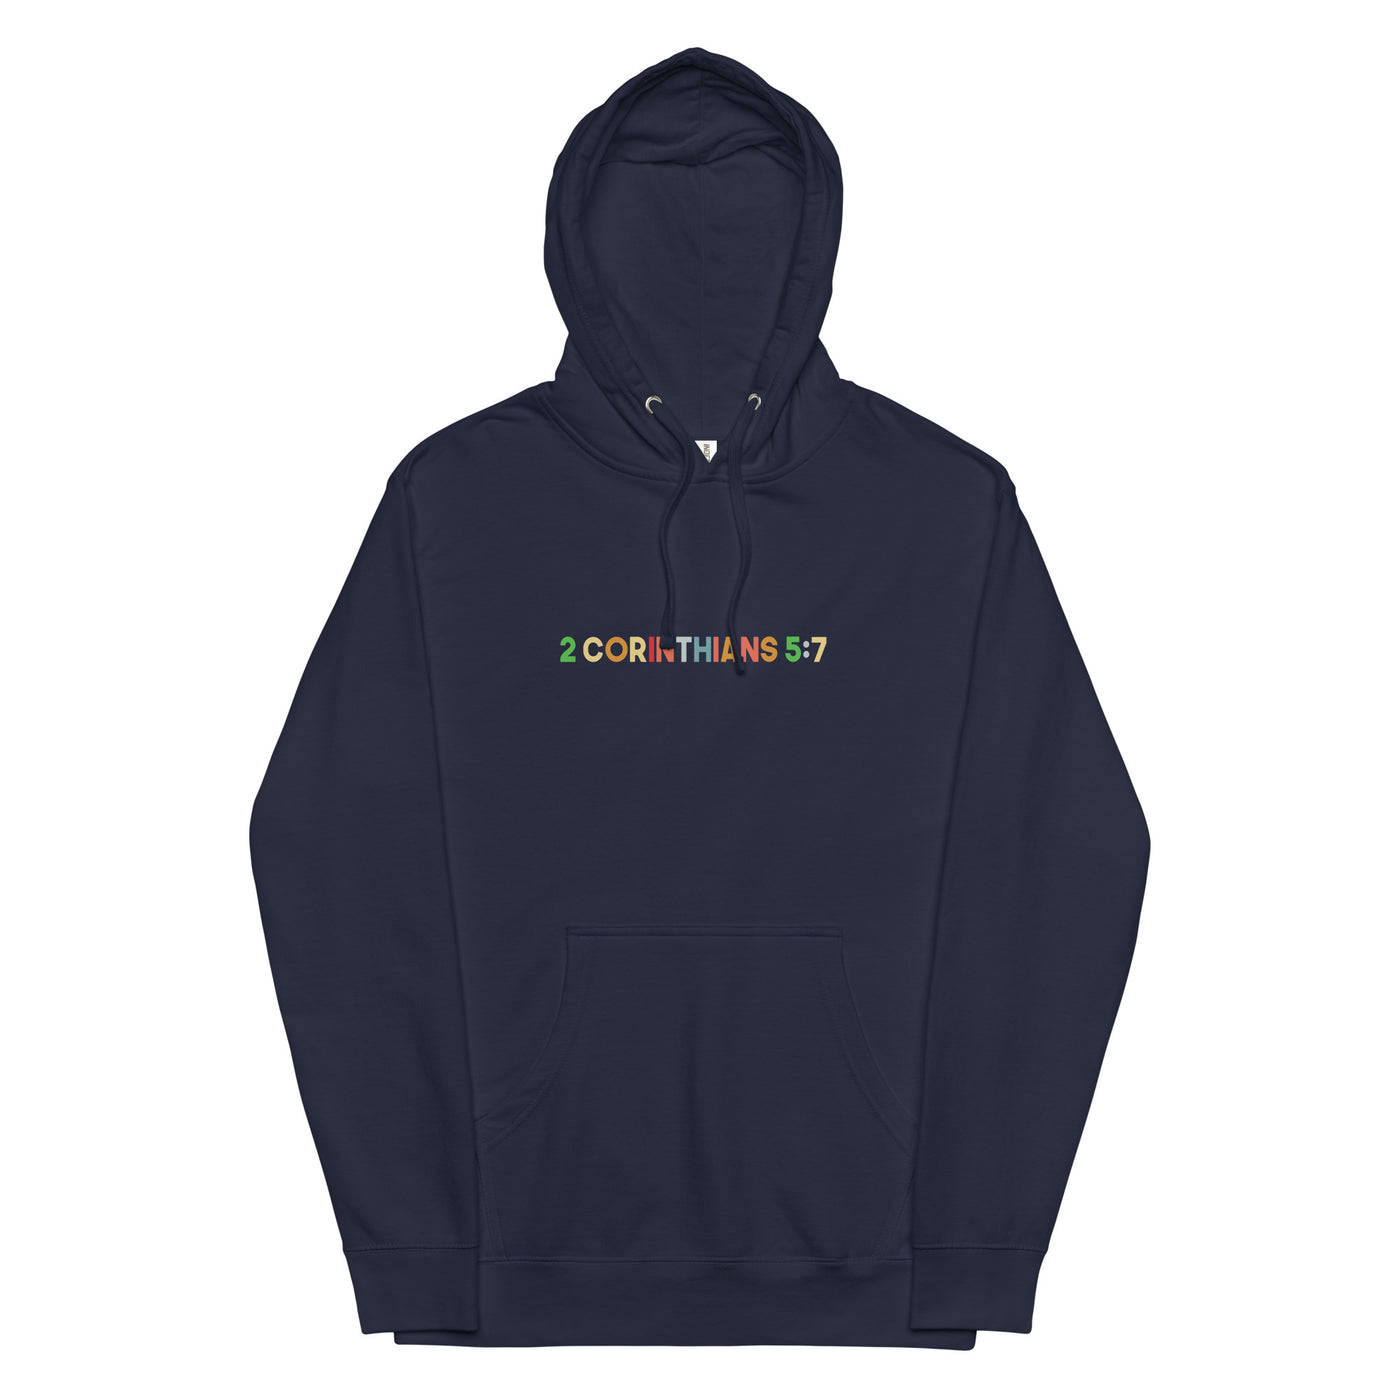 F&H Walk By Faith Not By Sight Unisex Hoodie